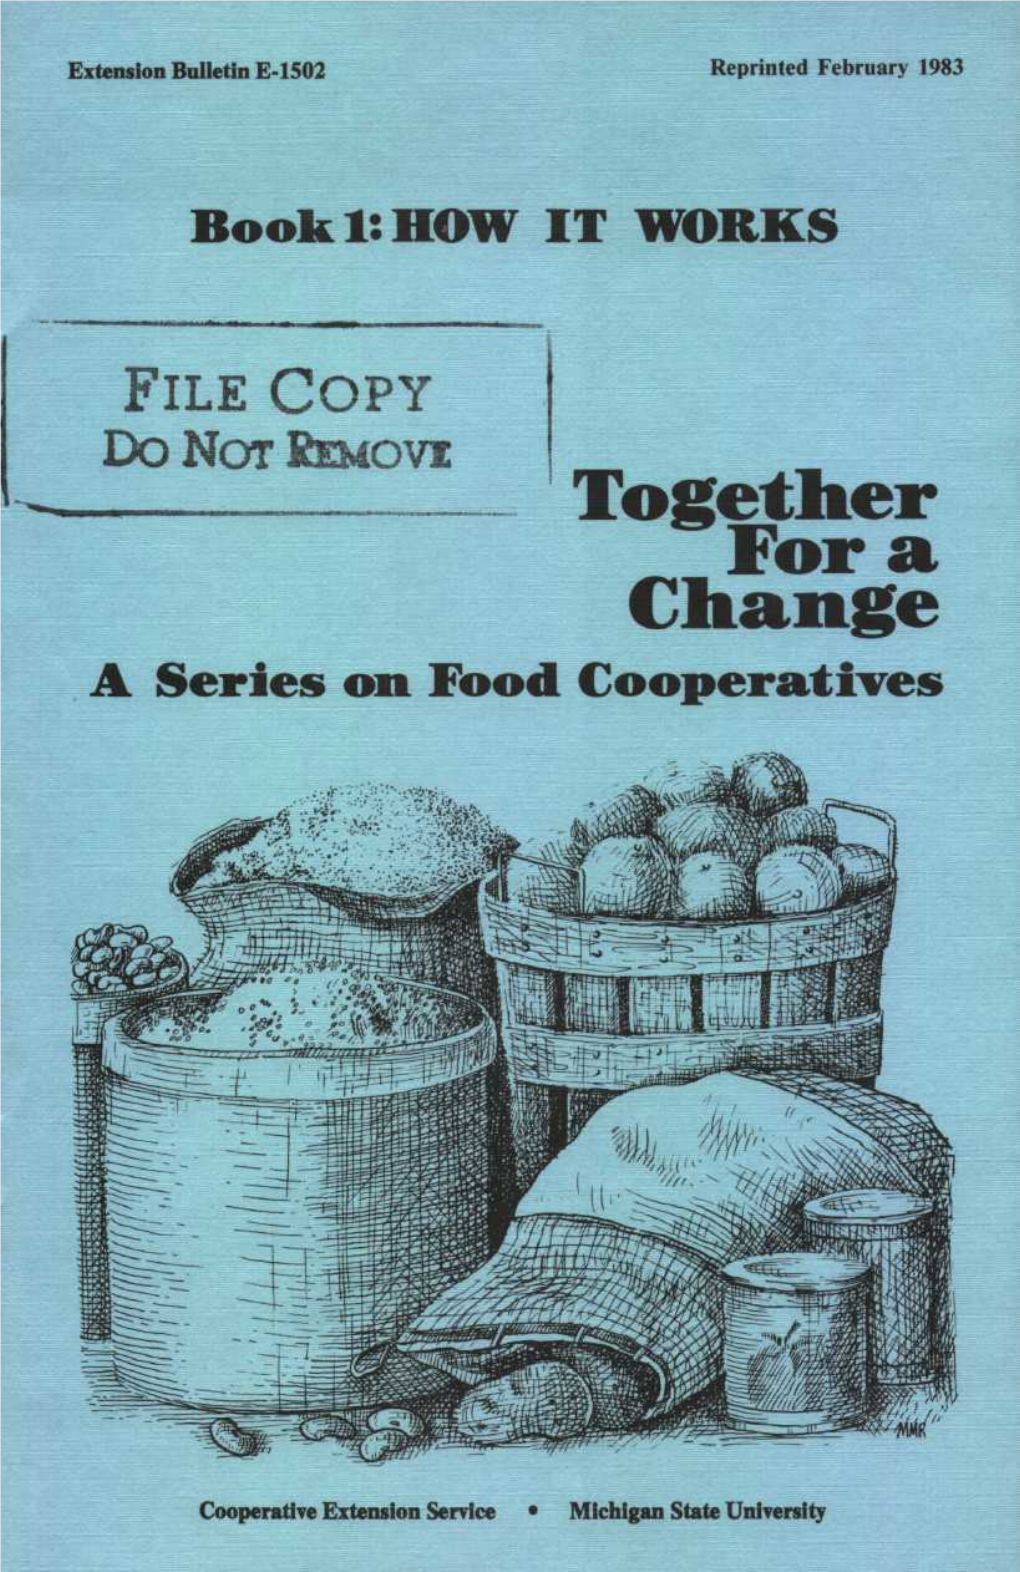 Together Fora Change a Series on Food Cooperatives